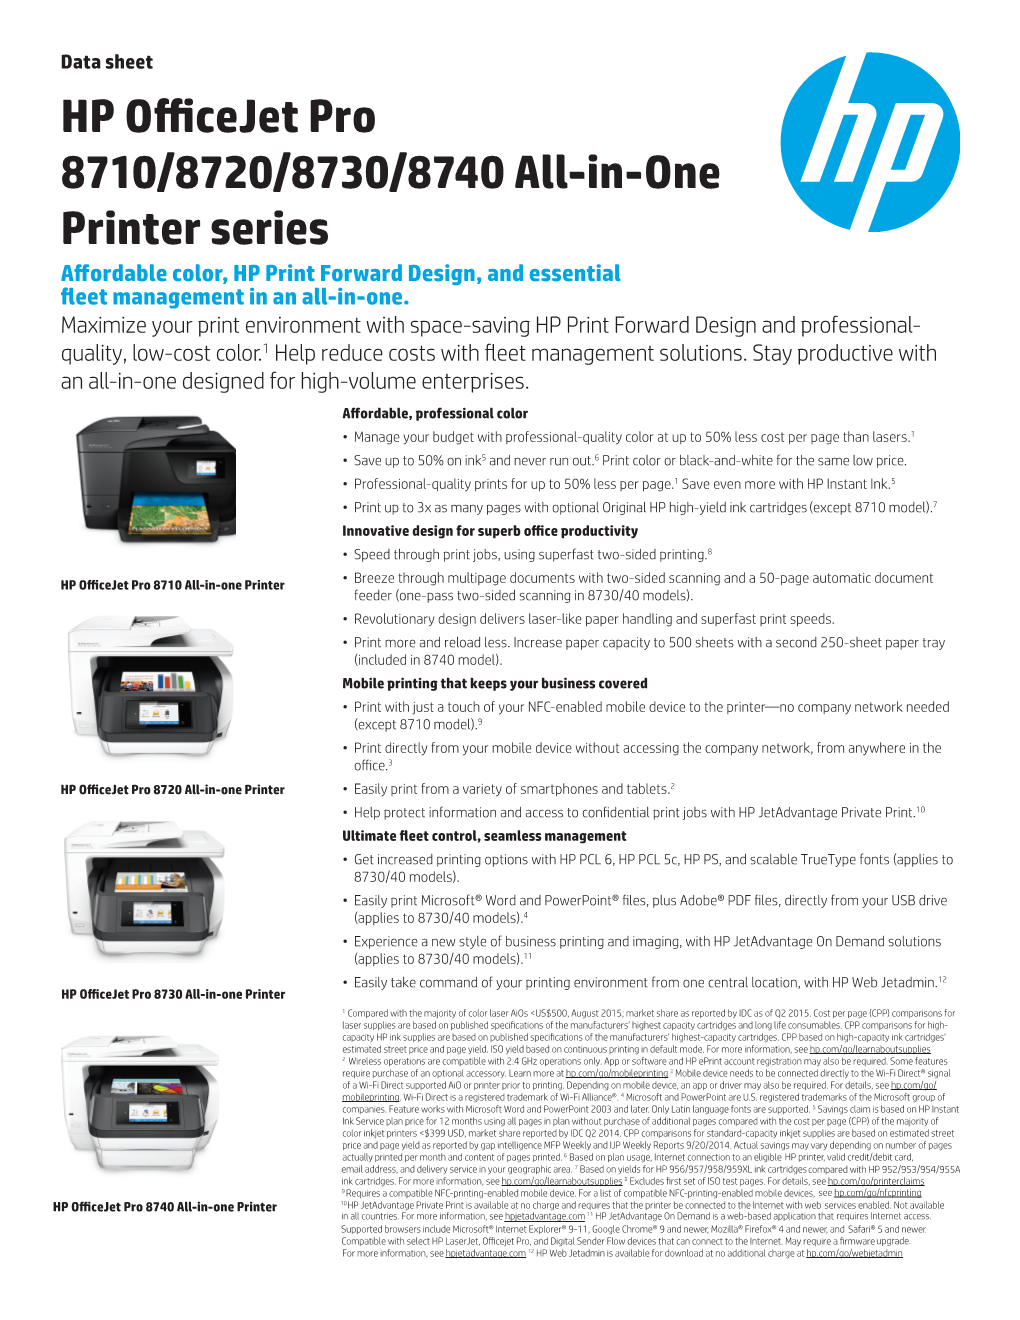 HP Officejet Pro 8710/8720/8730/8740 All-In-One Printer Series Affordable Color, HP Print Forward Design, and Essential Fleet Management in an All-In-One